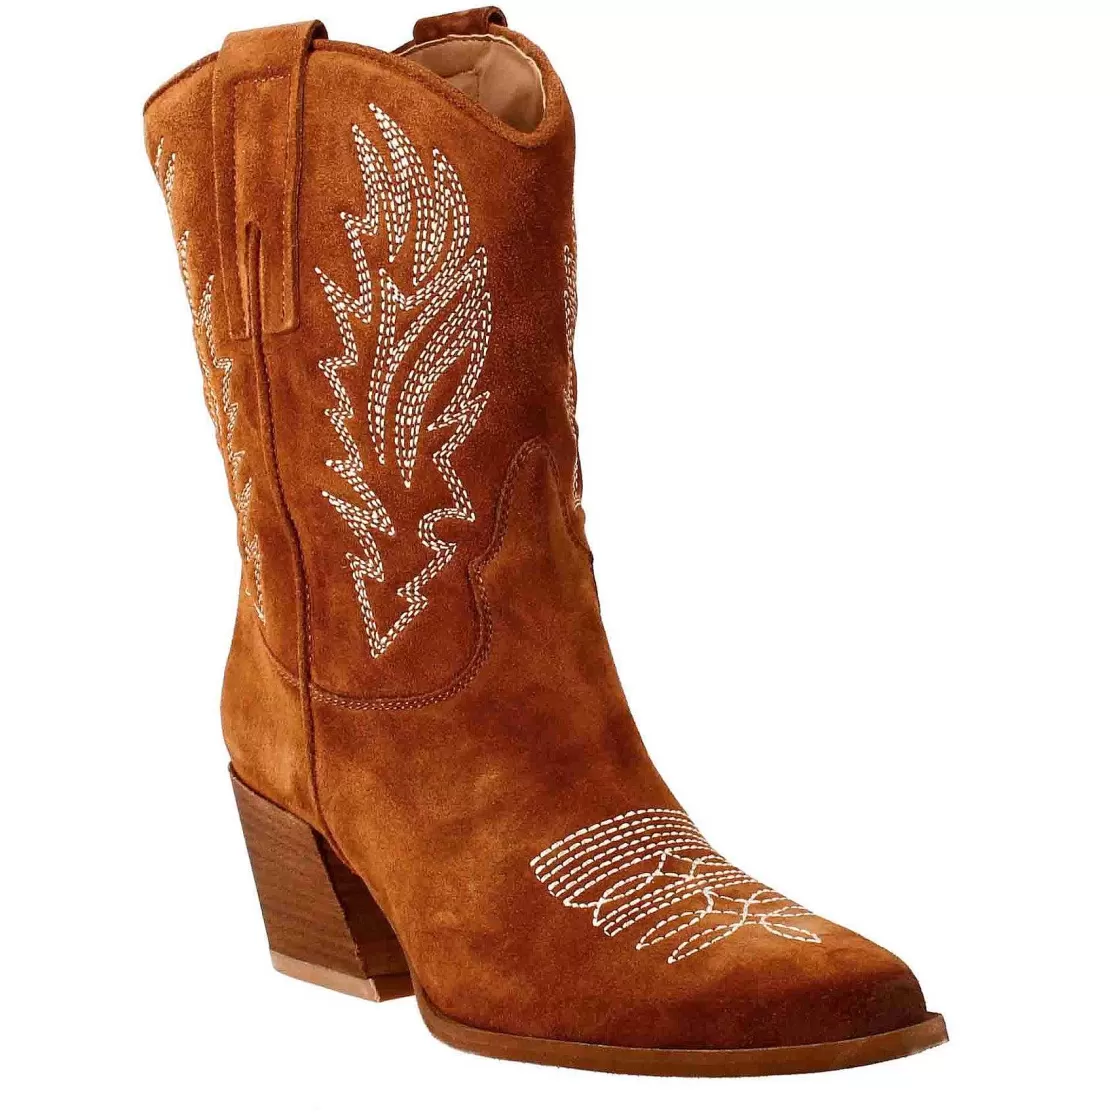 Leonardo Low Women'S Texan Boots In Burnt Brown Suede With Embroidery. Cheap